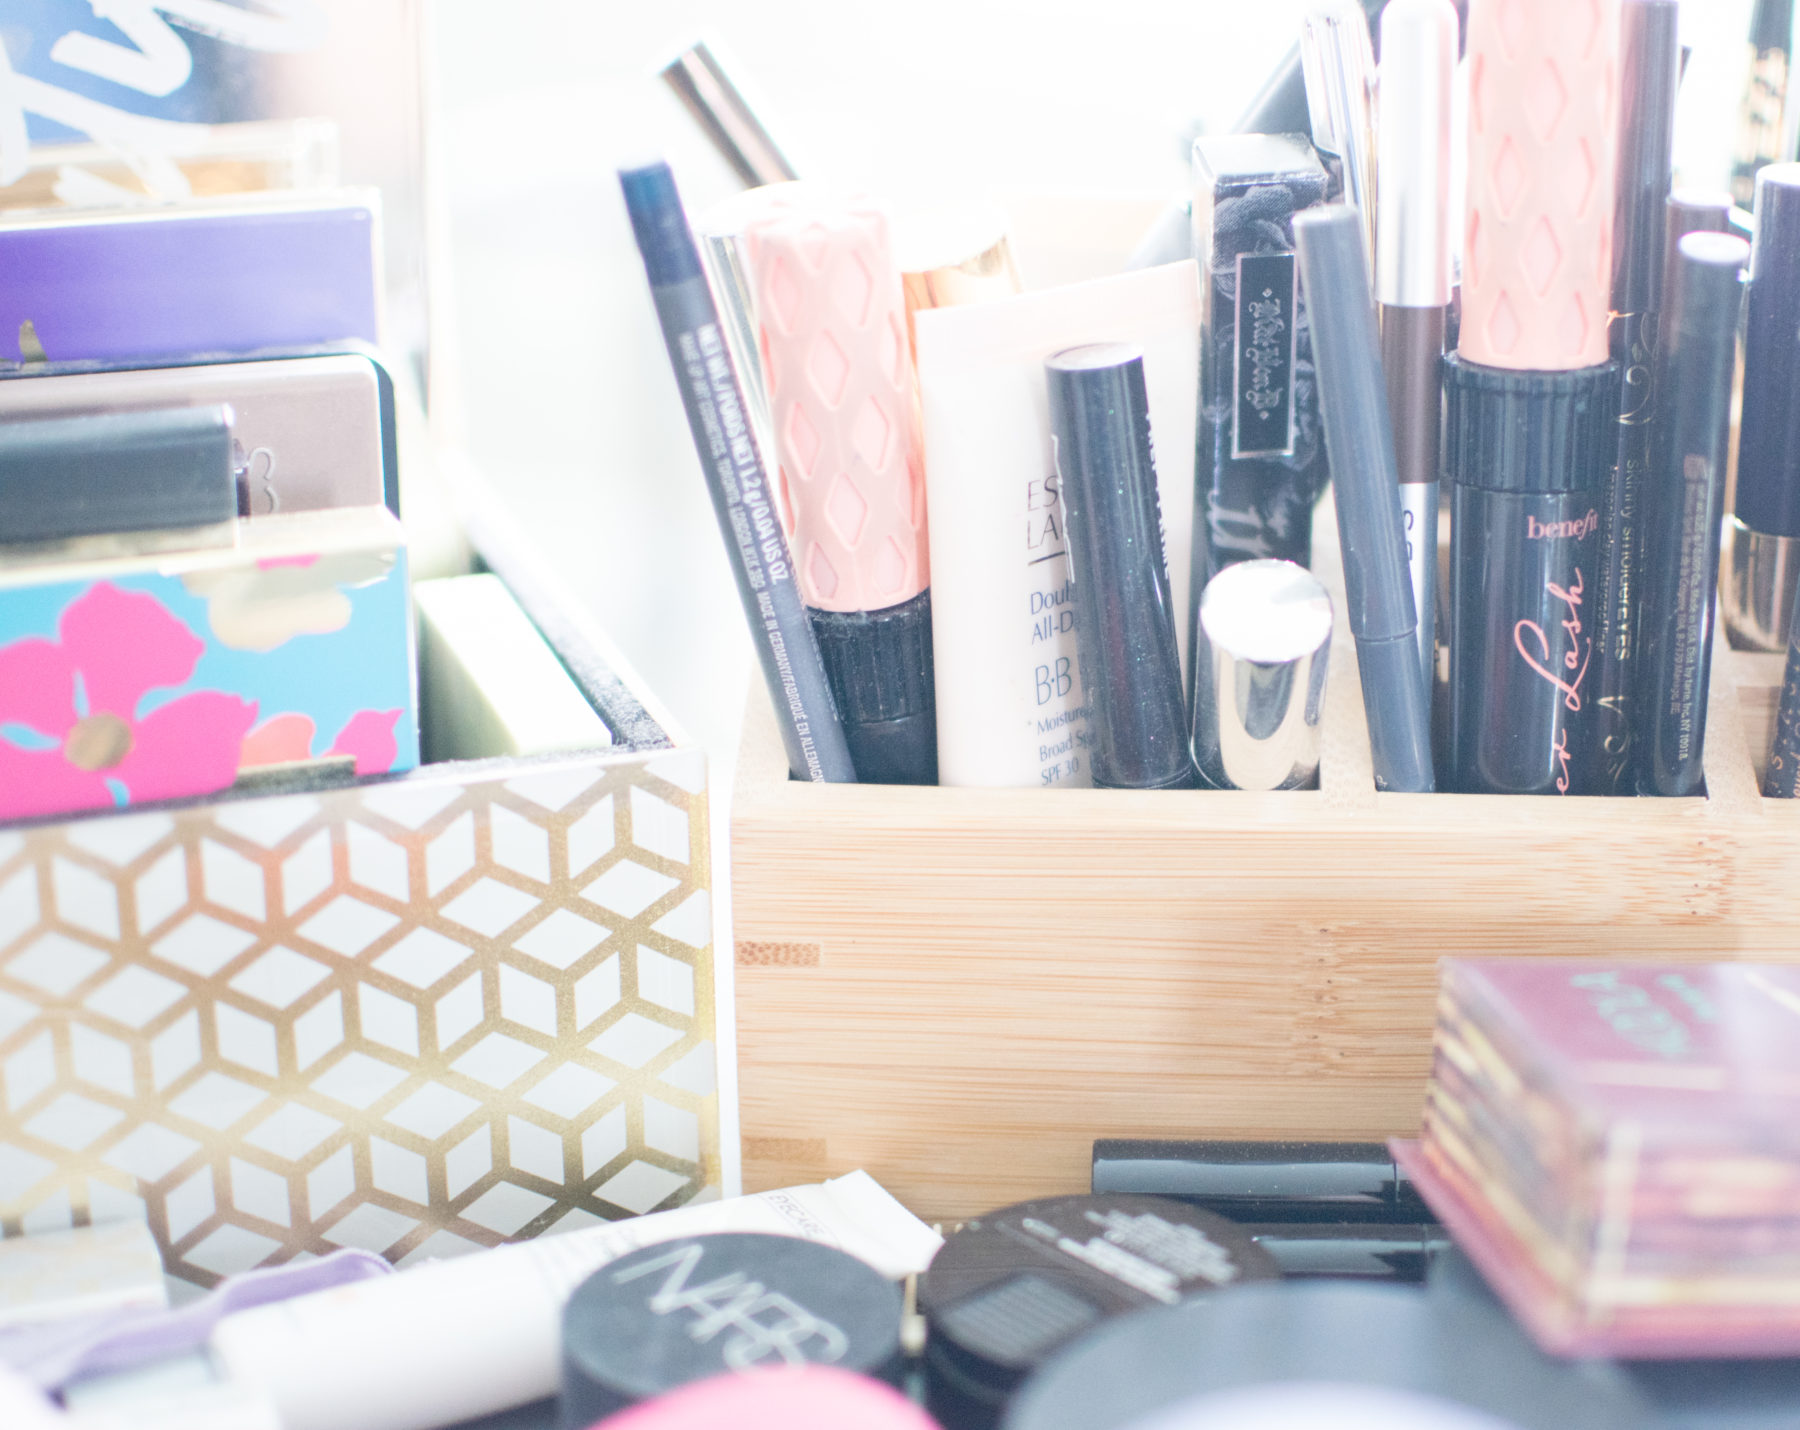 5 Most Commonly Asked Questions about Makeup + Hair